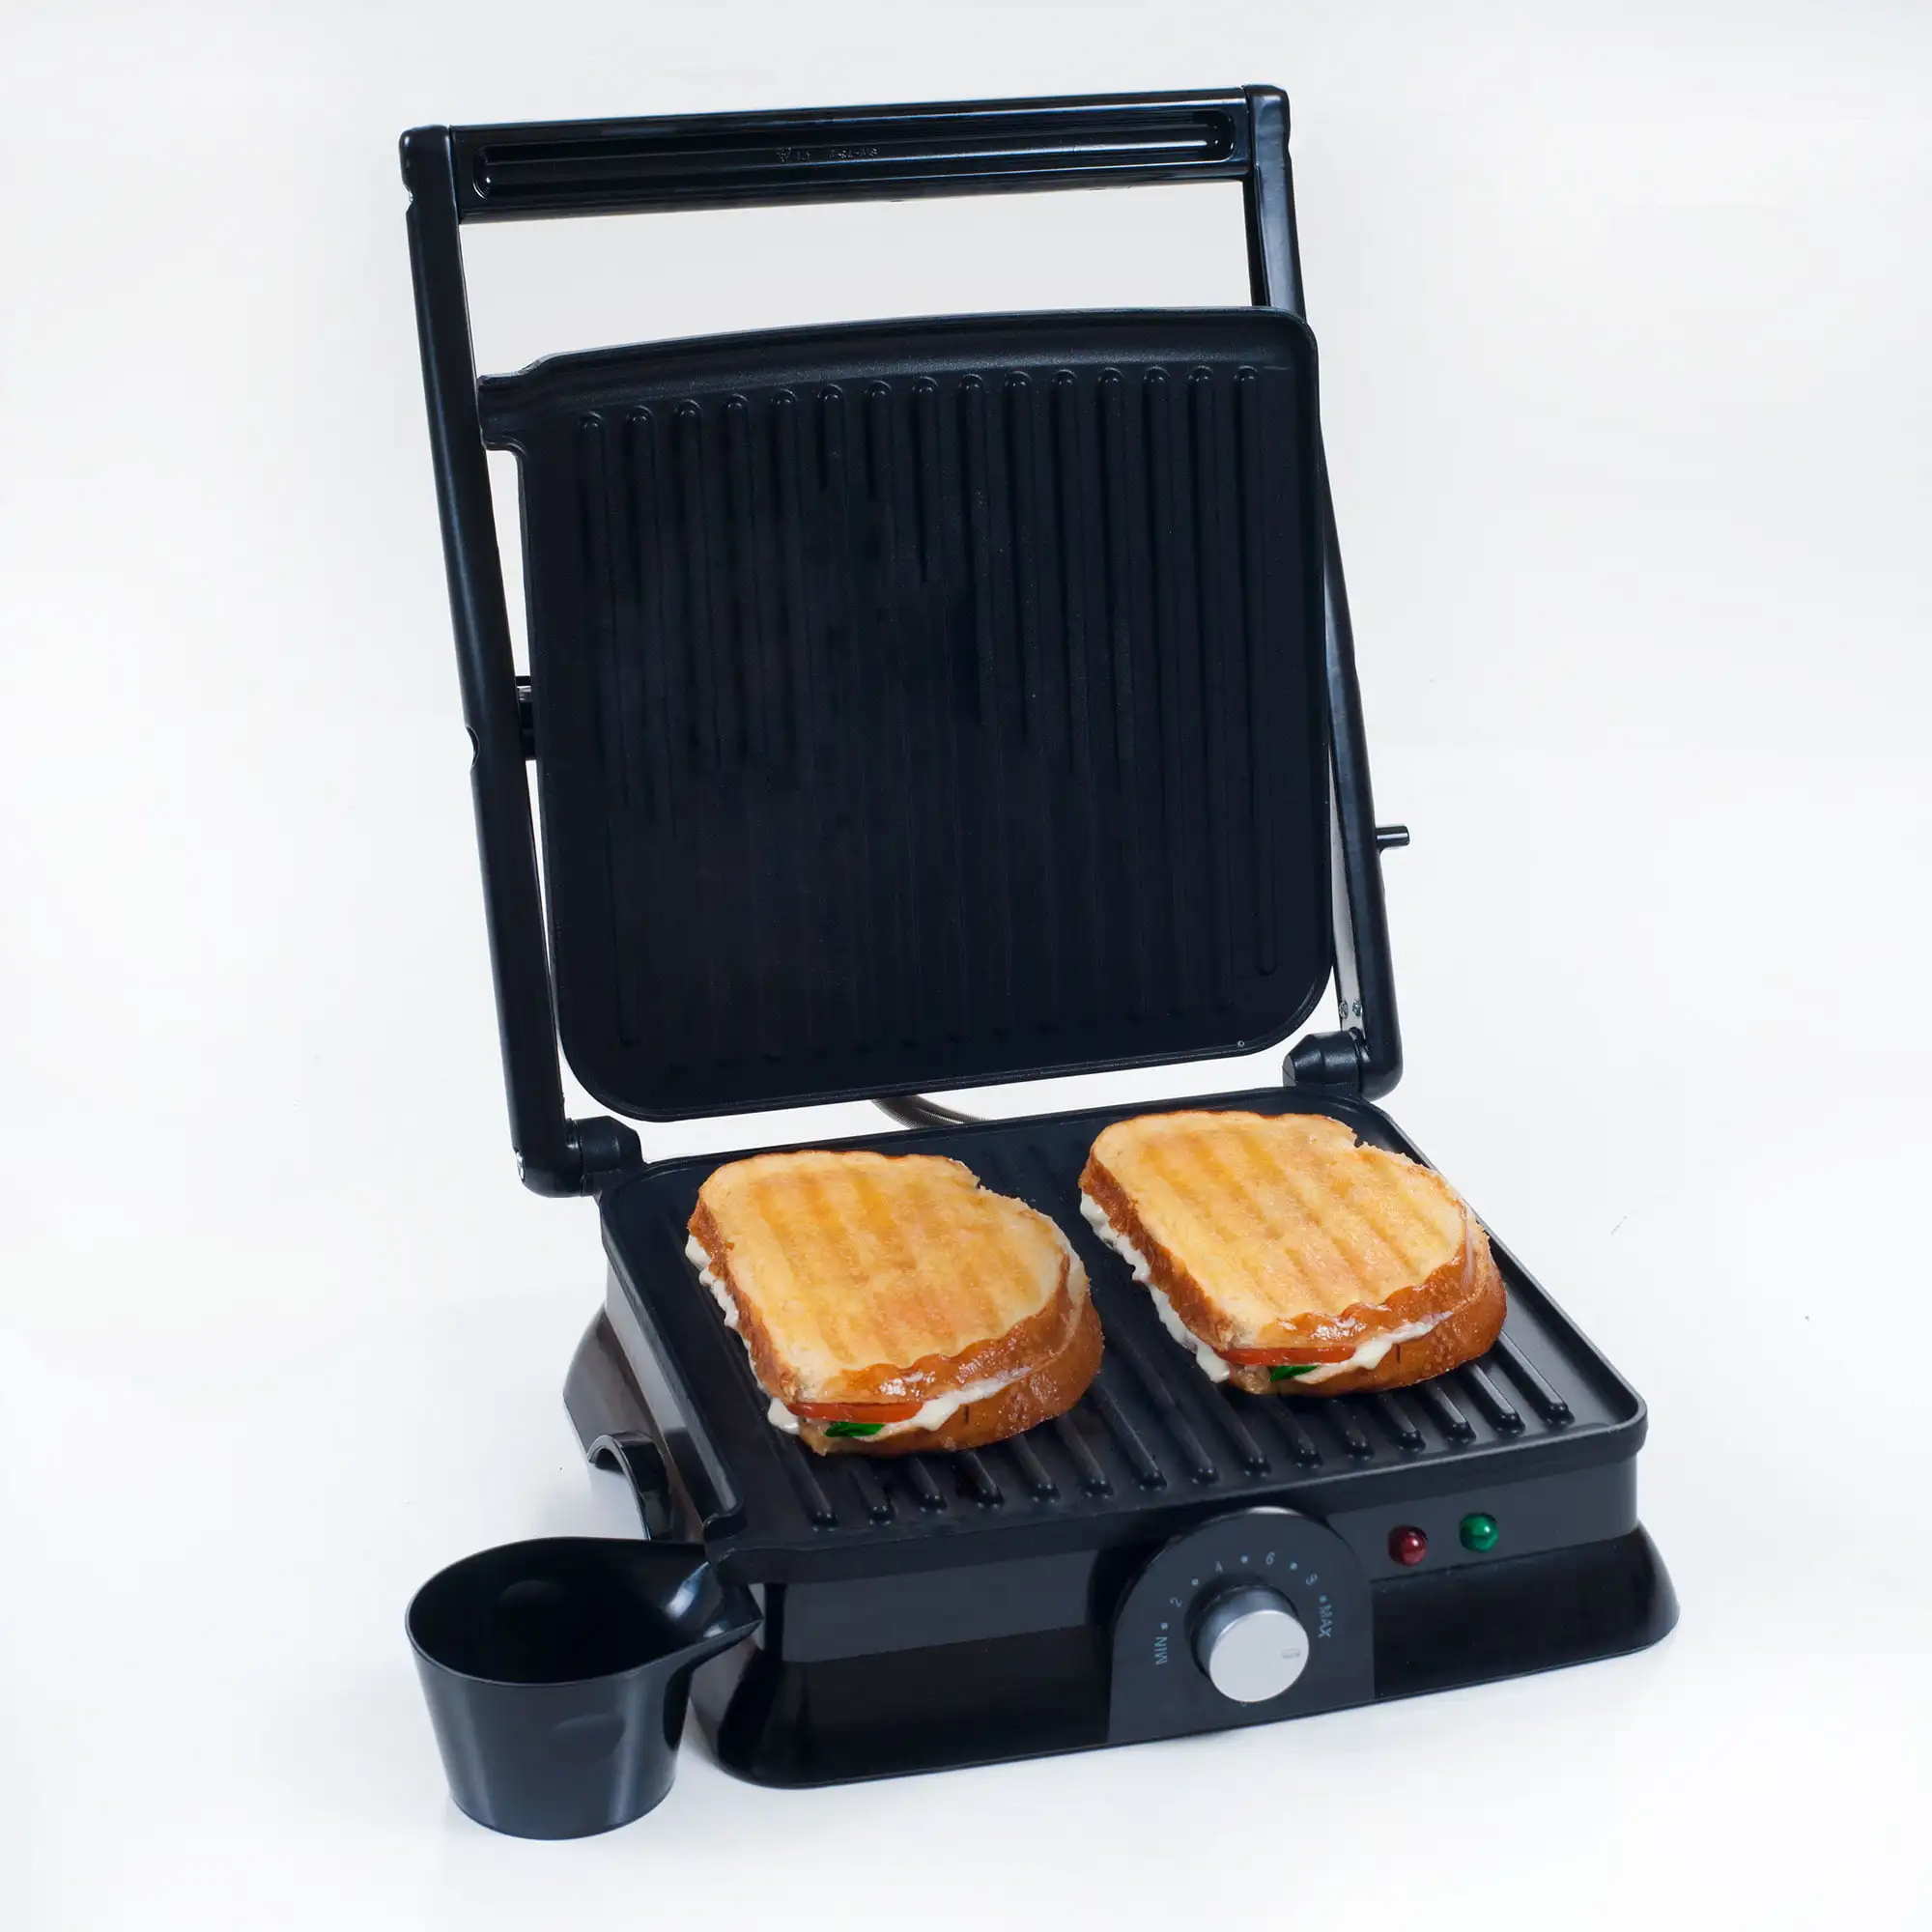 

Chef Buddy Panini Press Indoor Grill and Gourmet Sandwich Maker (Black)